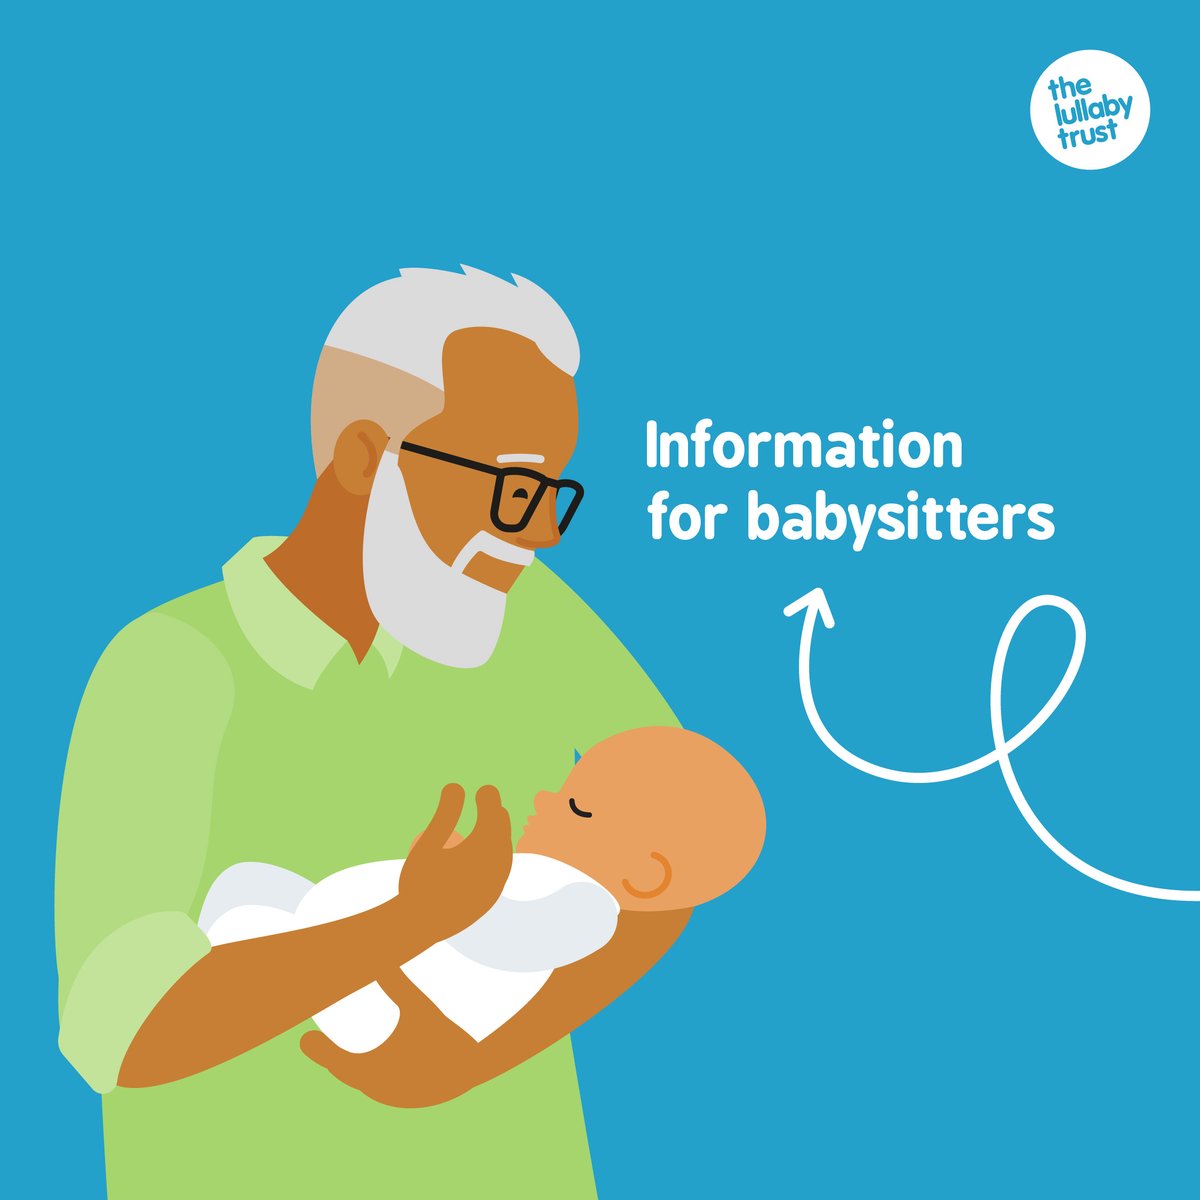 Baby sleep advice has changed a lot over the last 30 years so there’s a chance your parents, siblings, cousins, aunts, uncles, and friends aren’t up to date with the latest guidance. Send them this webpage for a quick overview on safer sleep for babies: bit.ly/4ac343g